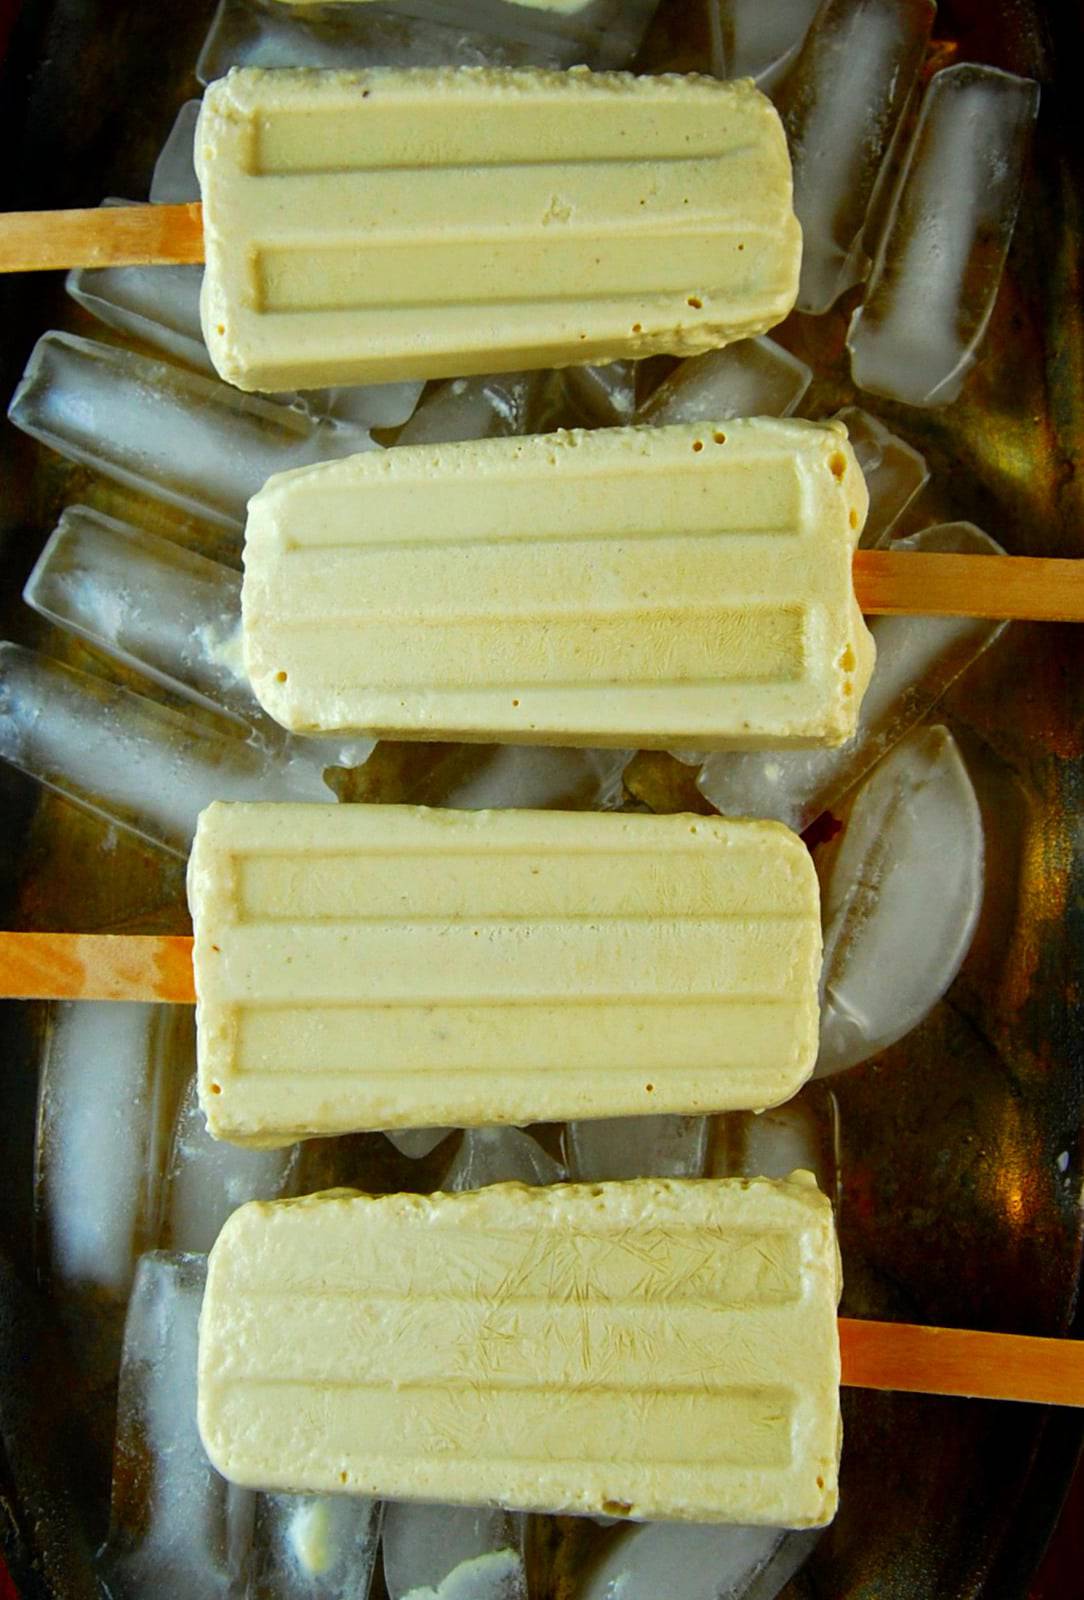 Pineapple cheesecake popsicles on ice in silver tray.